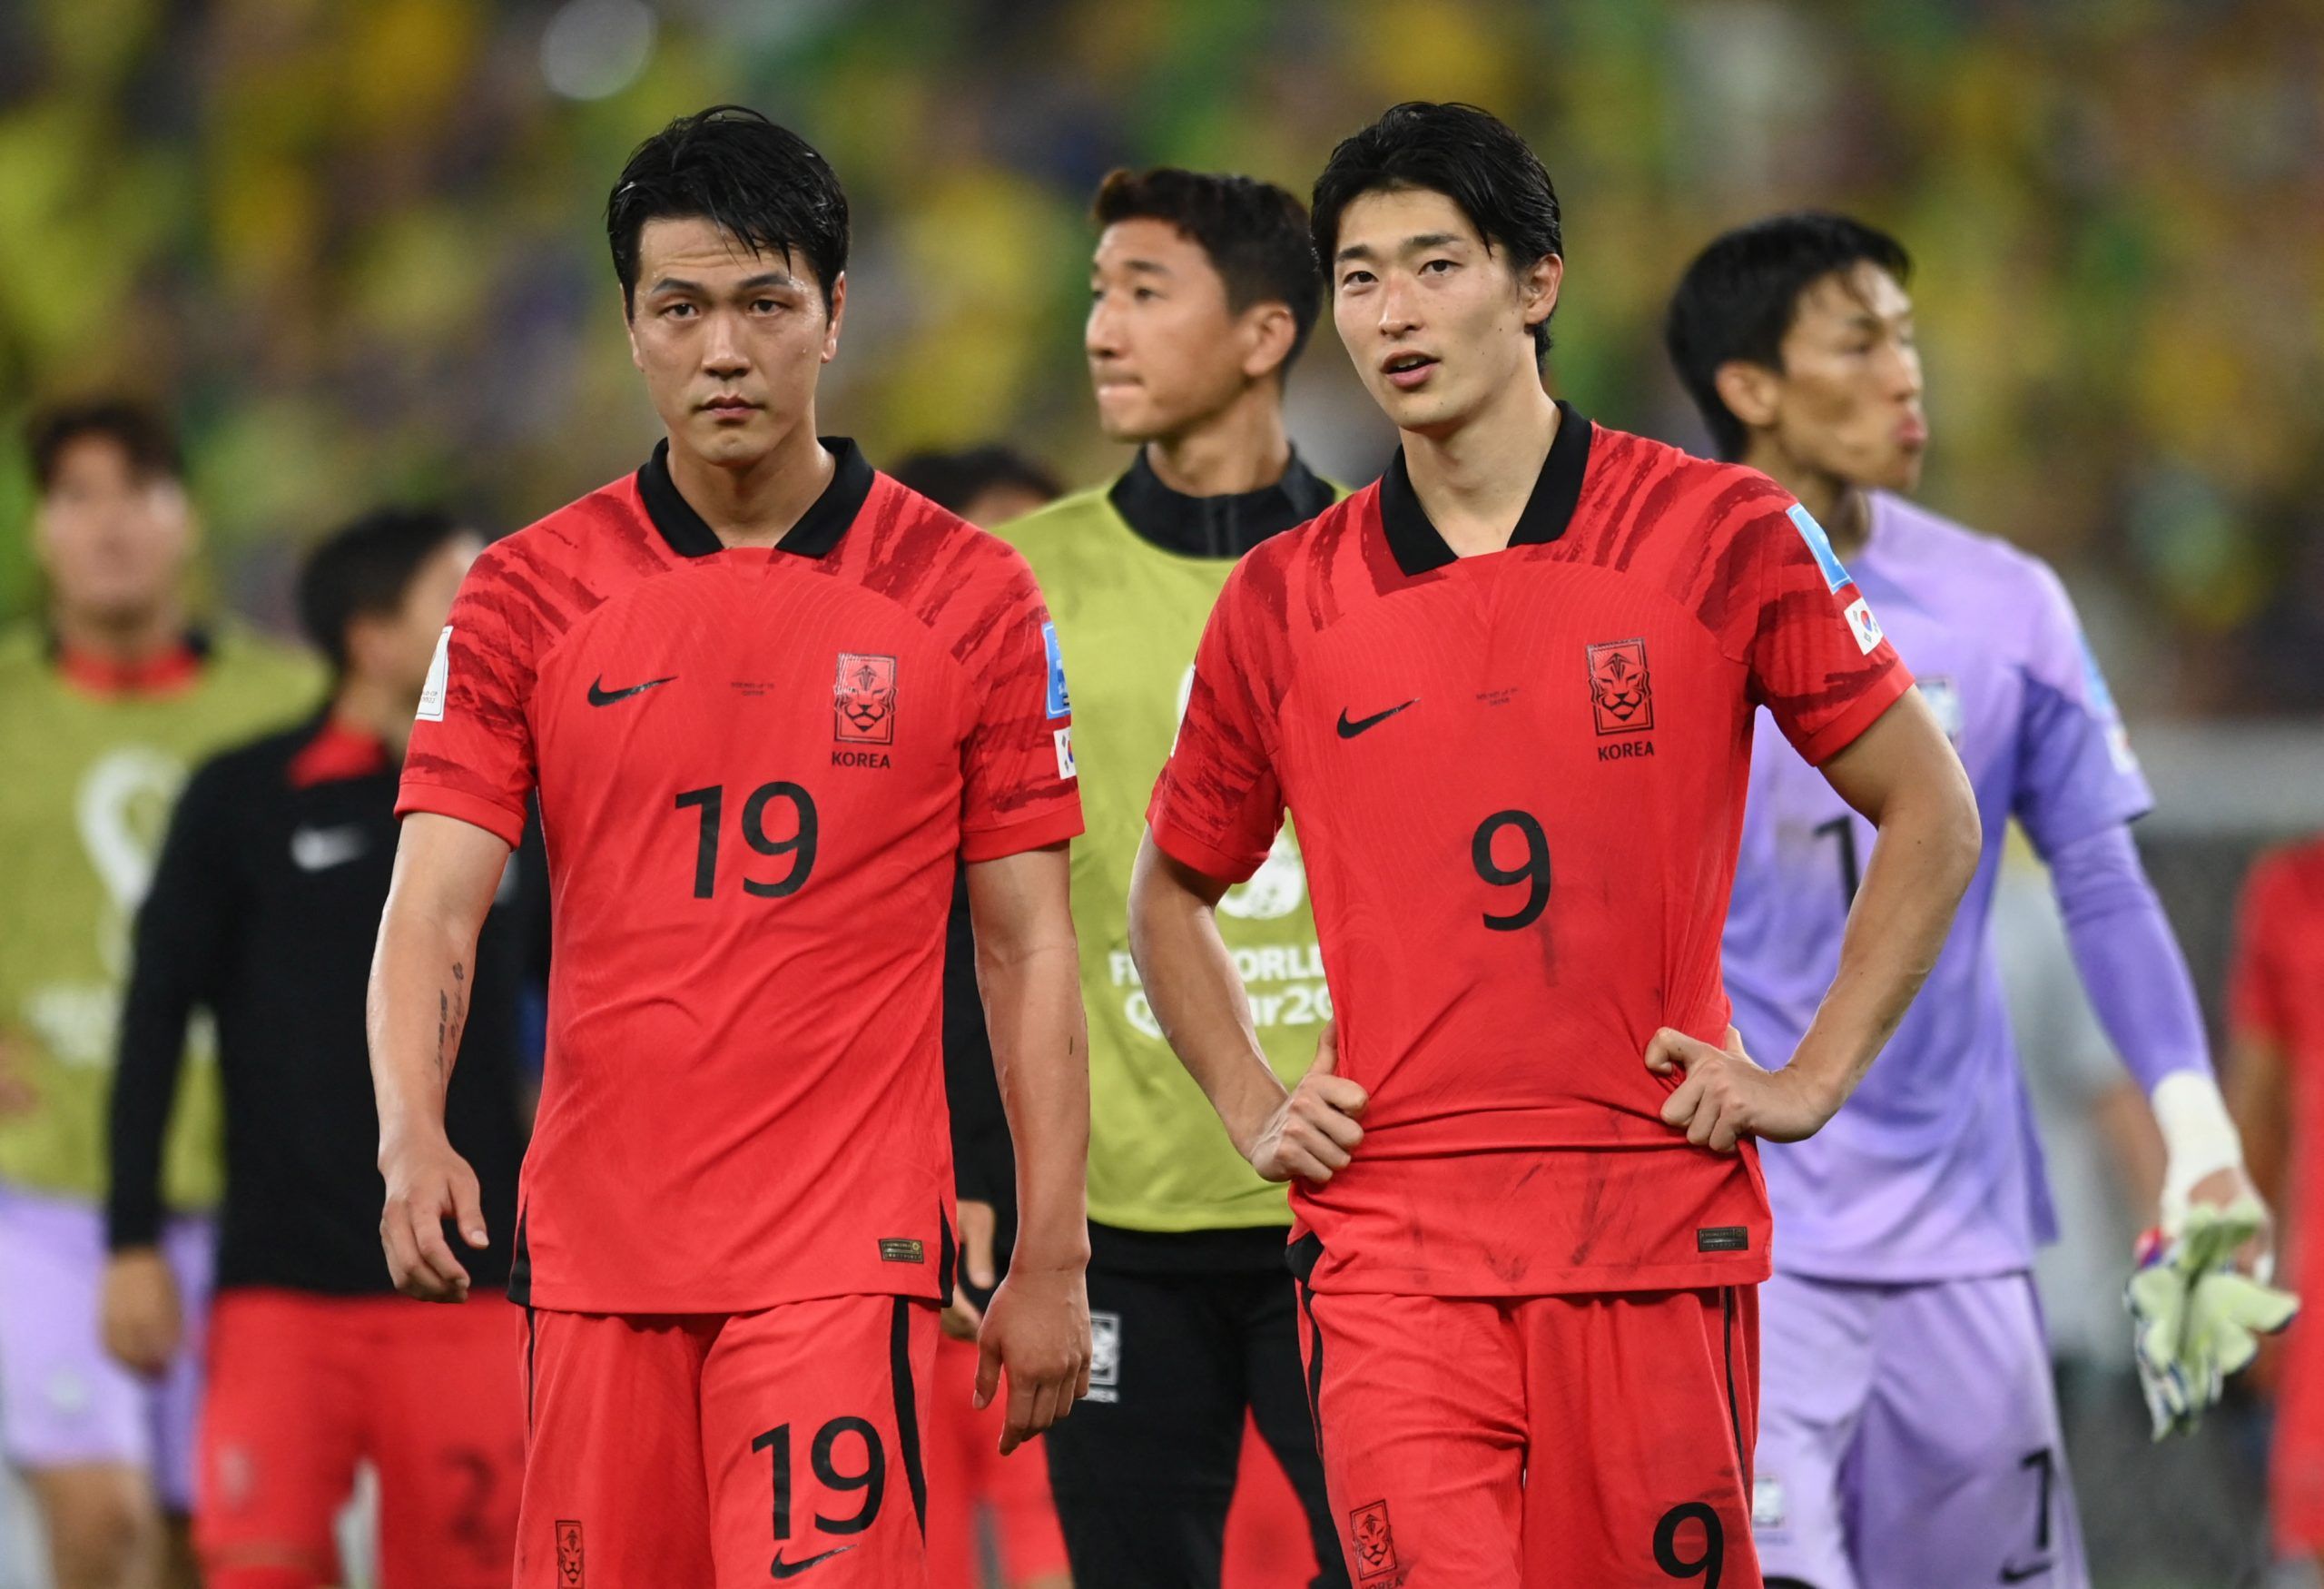 Soccer Football - FIFA World Cup Qatar 2022 - Round of 16 - Brazil v South Korea - Stadium 974, Doha, Qatar - December 5, 2022 South Korea's Kim Young-gwon and Cho Gue-sung look dejected after the match as South Korea are eliminated from the World Cup REUTERS/Annegret Hilse